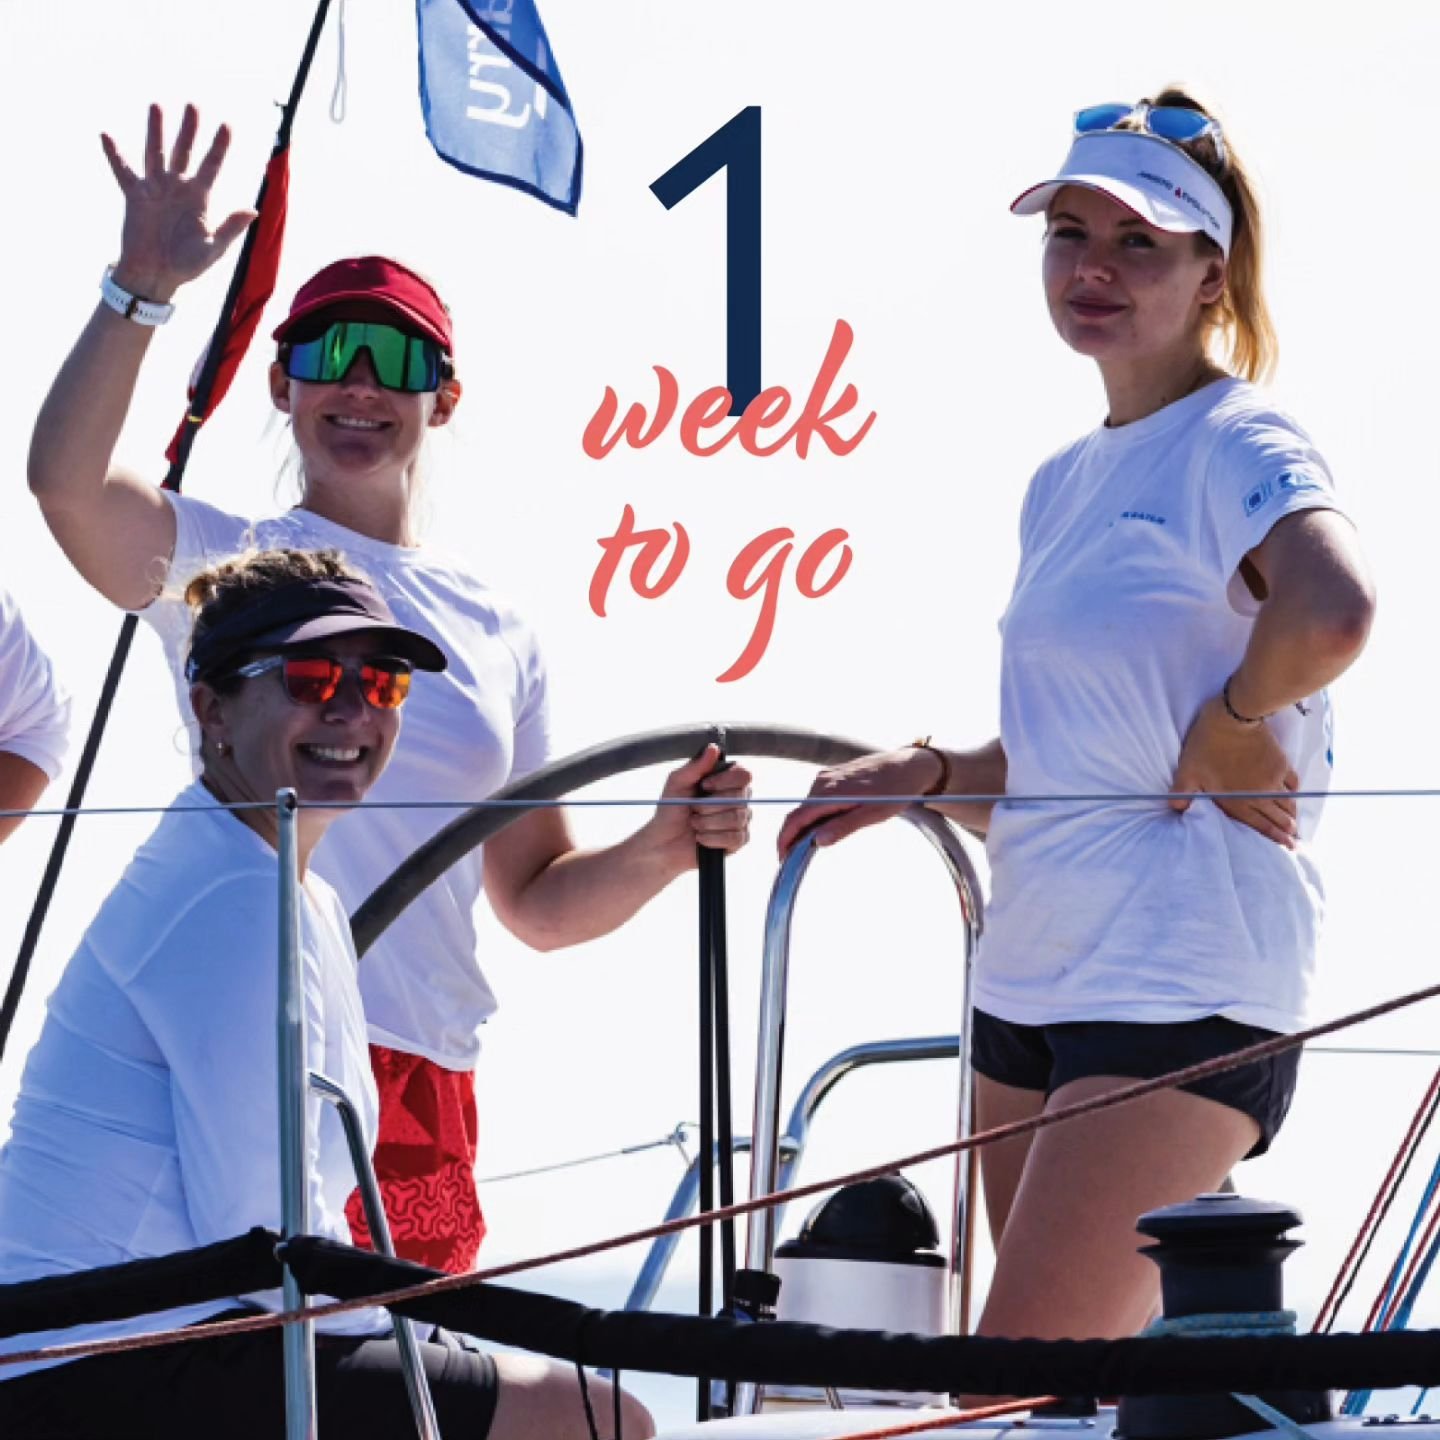 🏆 Countdown is on! Just 1 week until the UK's only all-female open keelboat championship kicks off 🥳 Get ready for a weekend of training, racing, and unbeatable onshore vibes!&nbsp;

📅 Friday: @onesails_gbr_south Training Day to help brush up on y